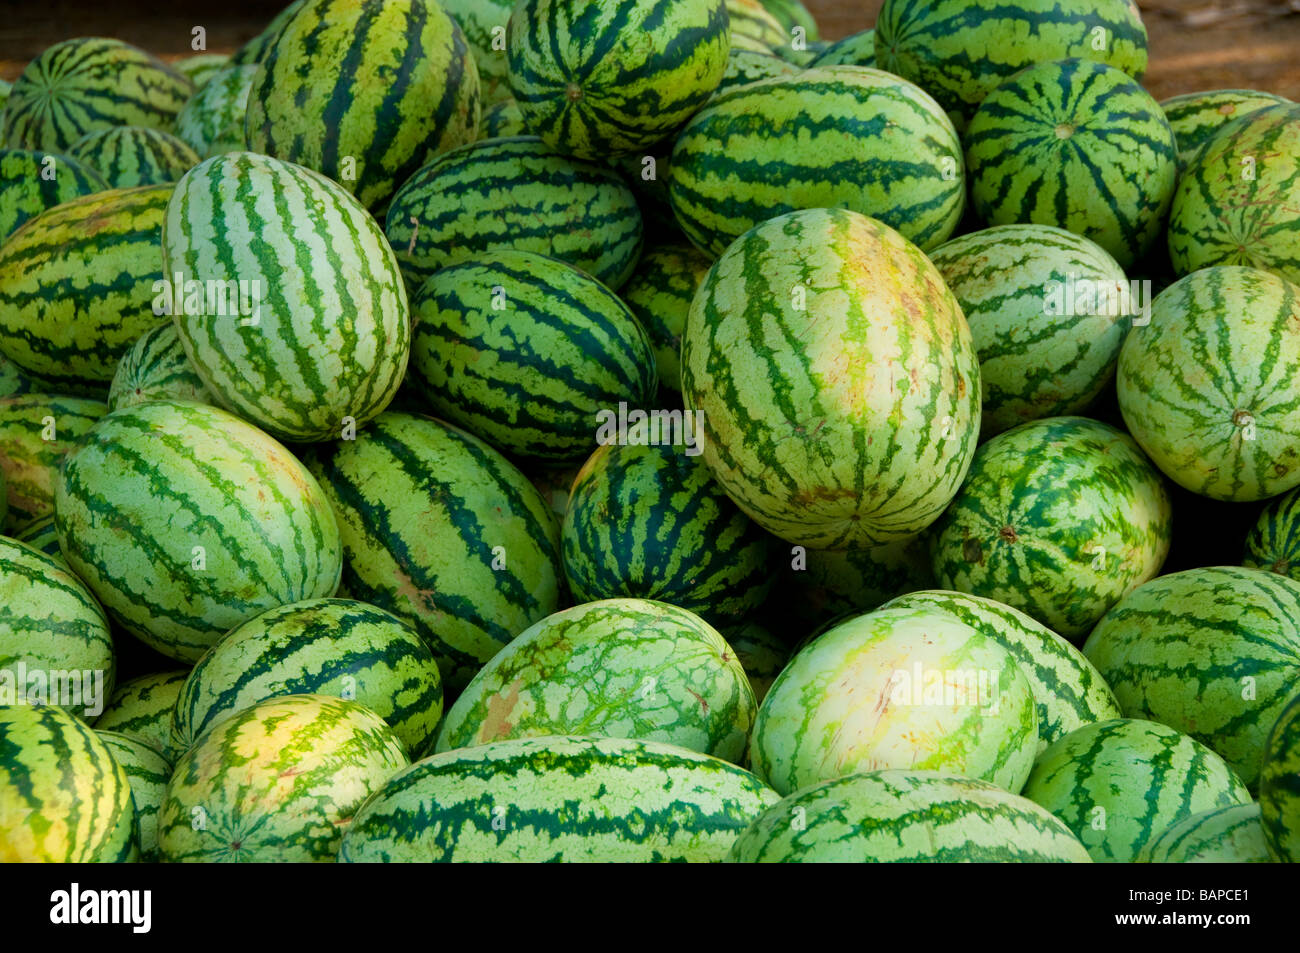 Large group of water melons (Citrullus lanatus) on roadside fruit stall at Fort Cochin, Fort Kochi, Kerala, Southern India Stock Photo